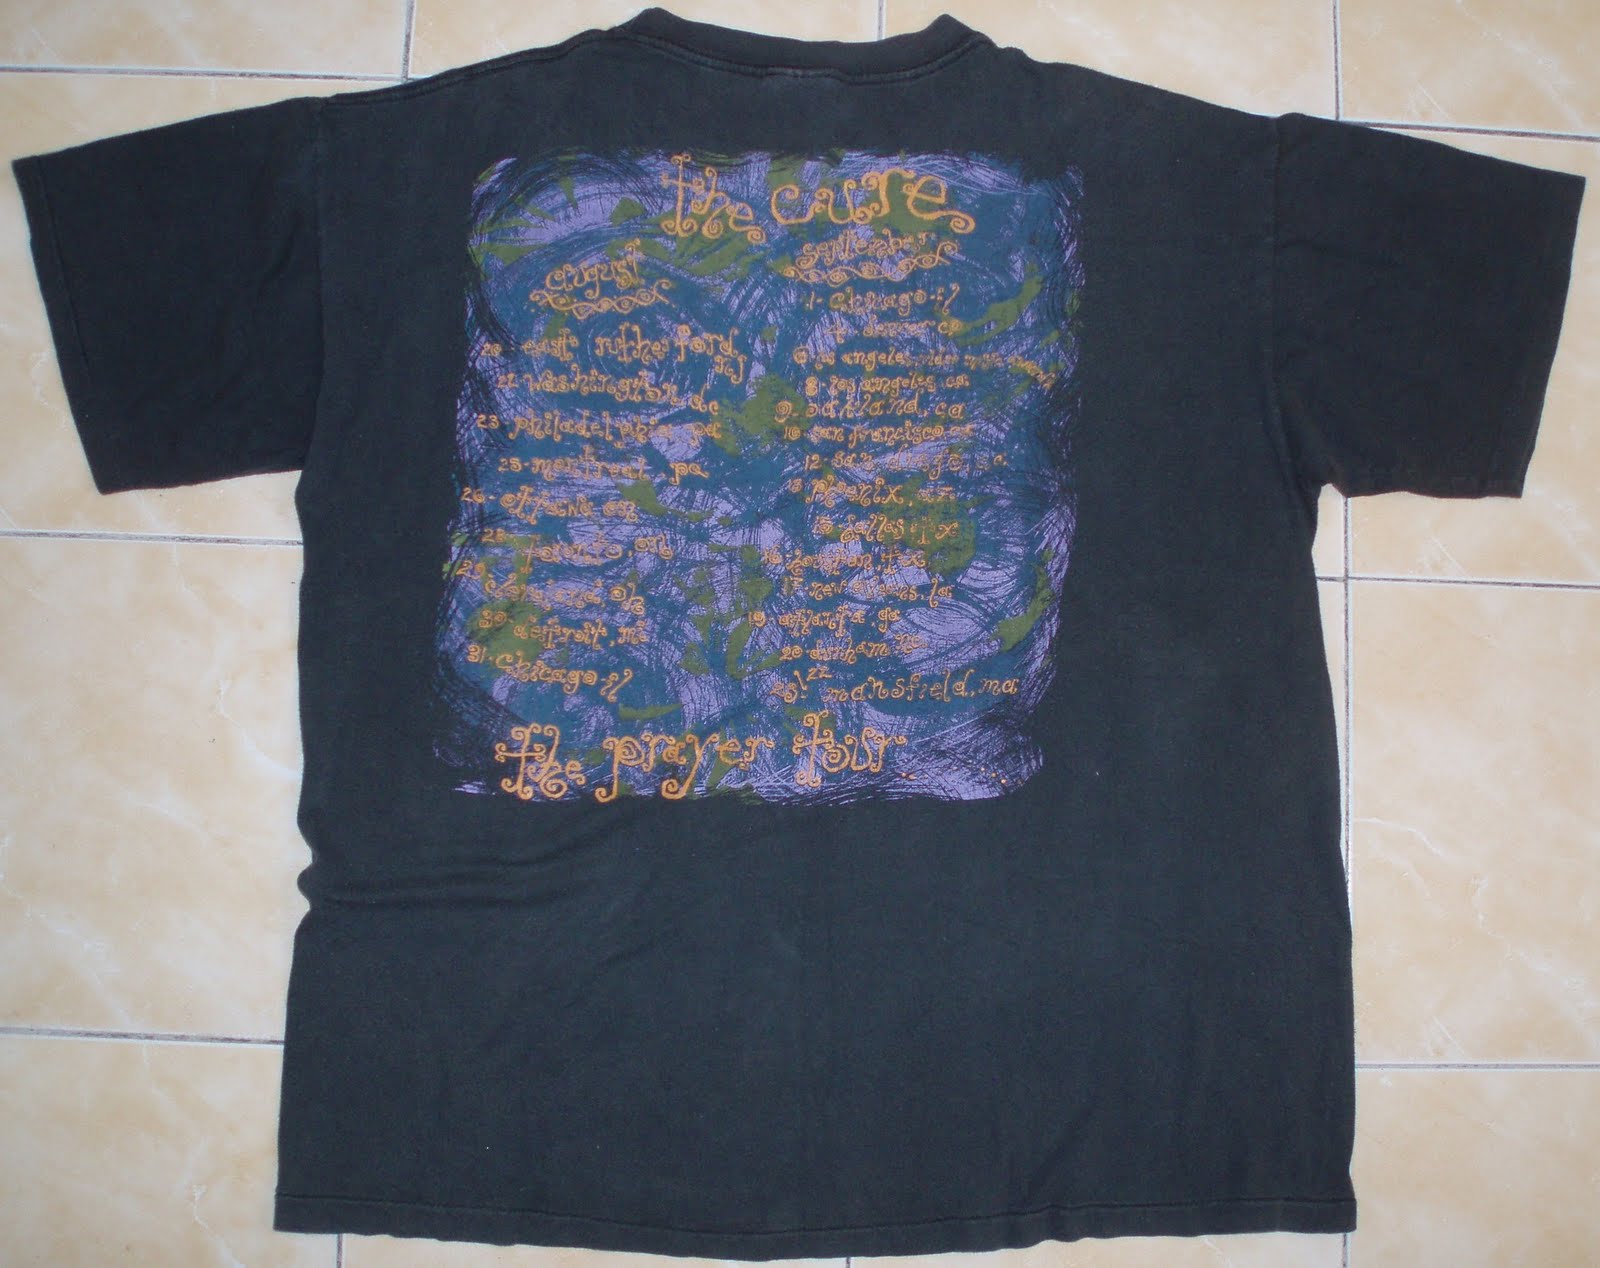 LEGACY: The Cure 1989 The Prayer US Tour T-Shirt Free Size (SOLD)